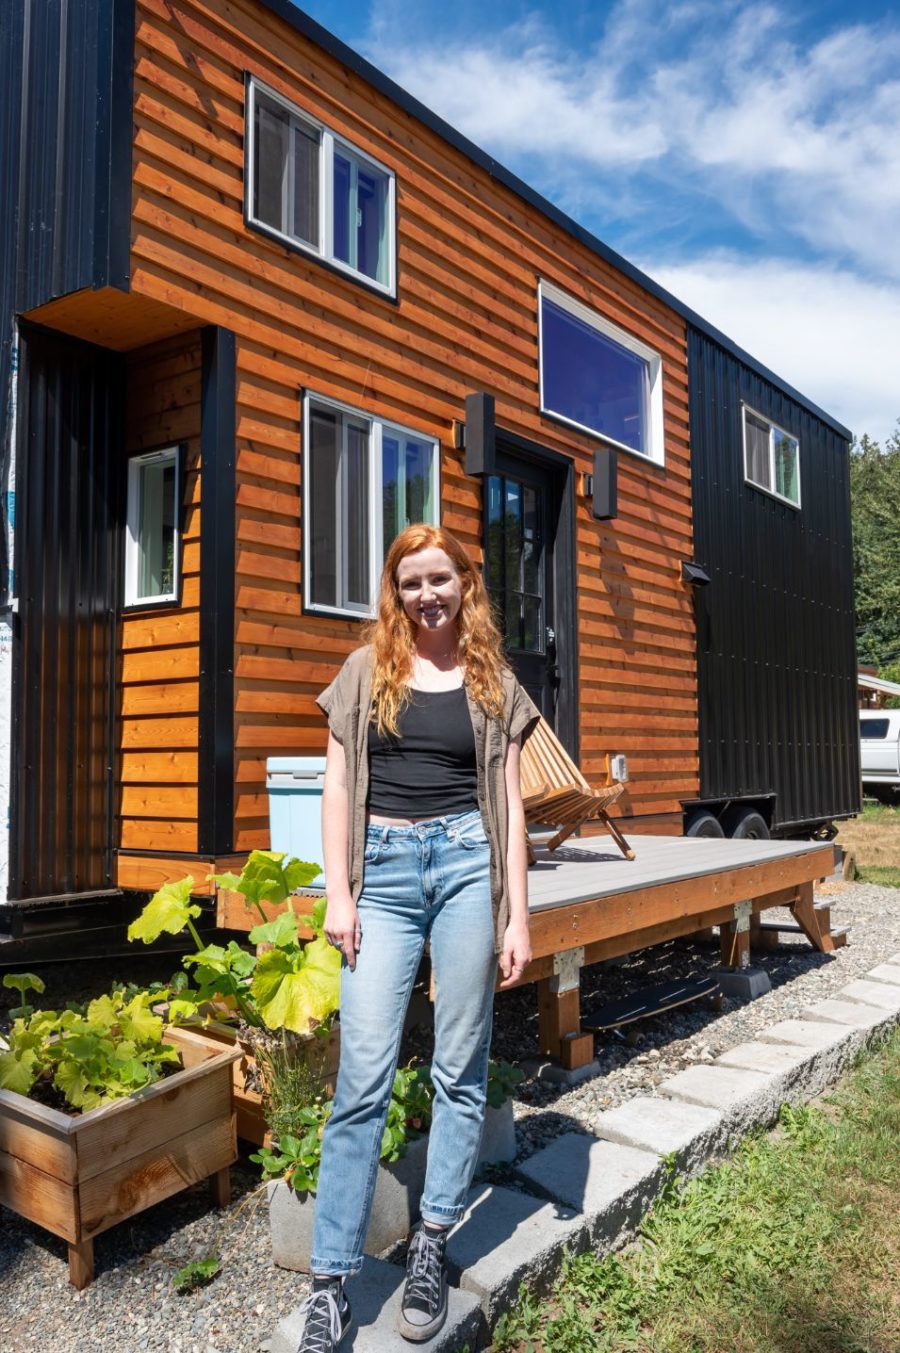 She Built Her $40K Tiny Home with Cash 4